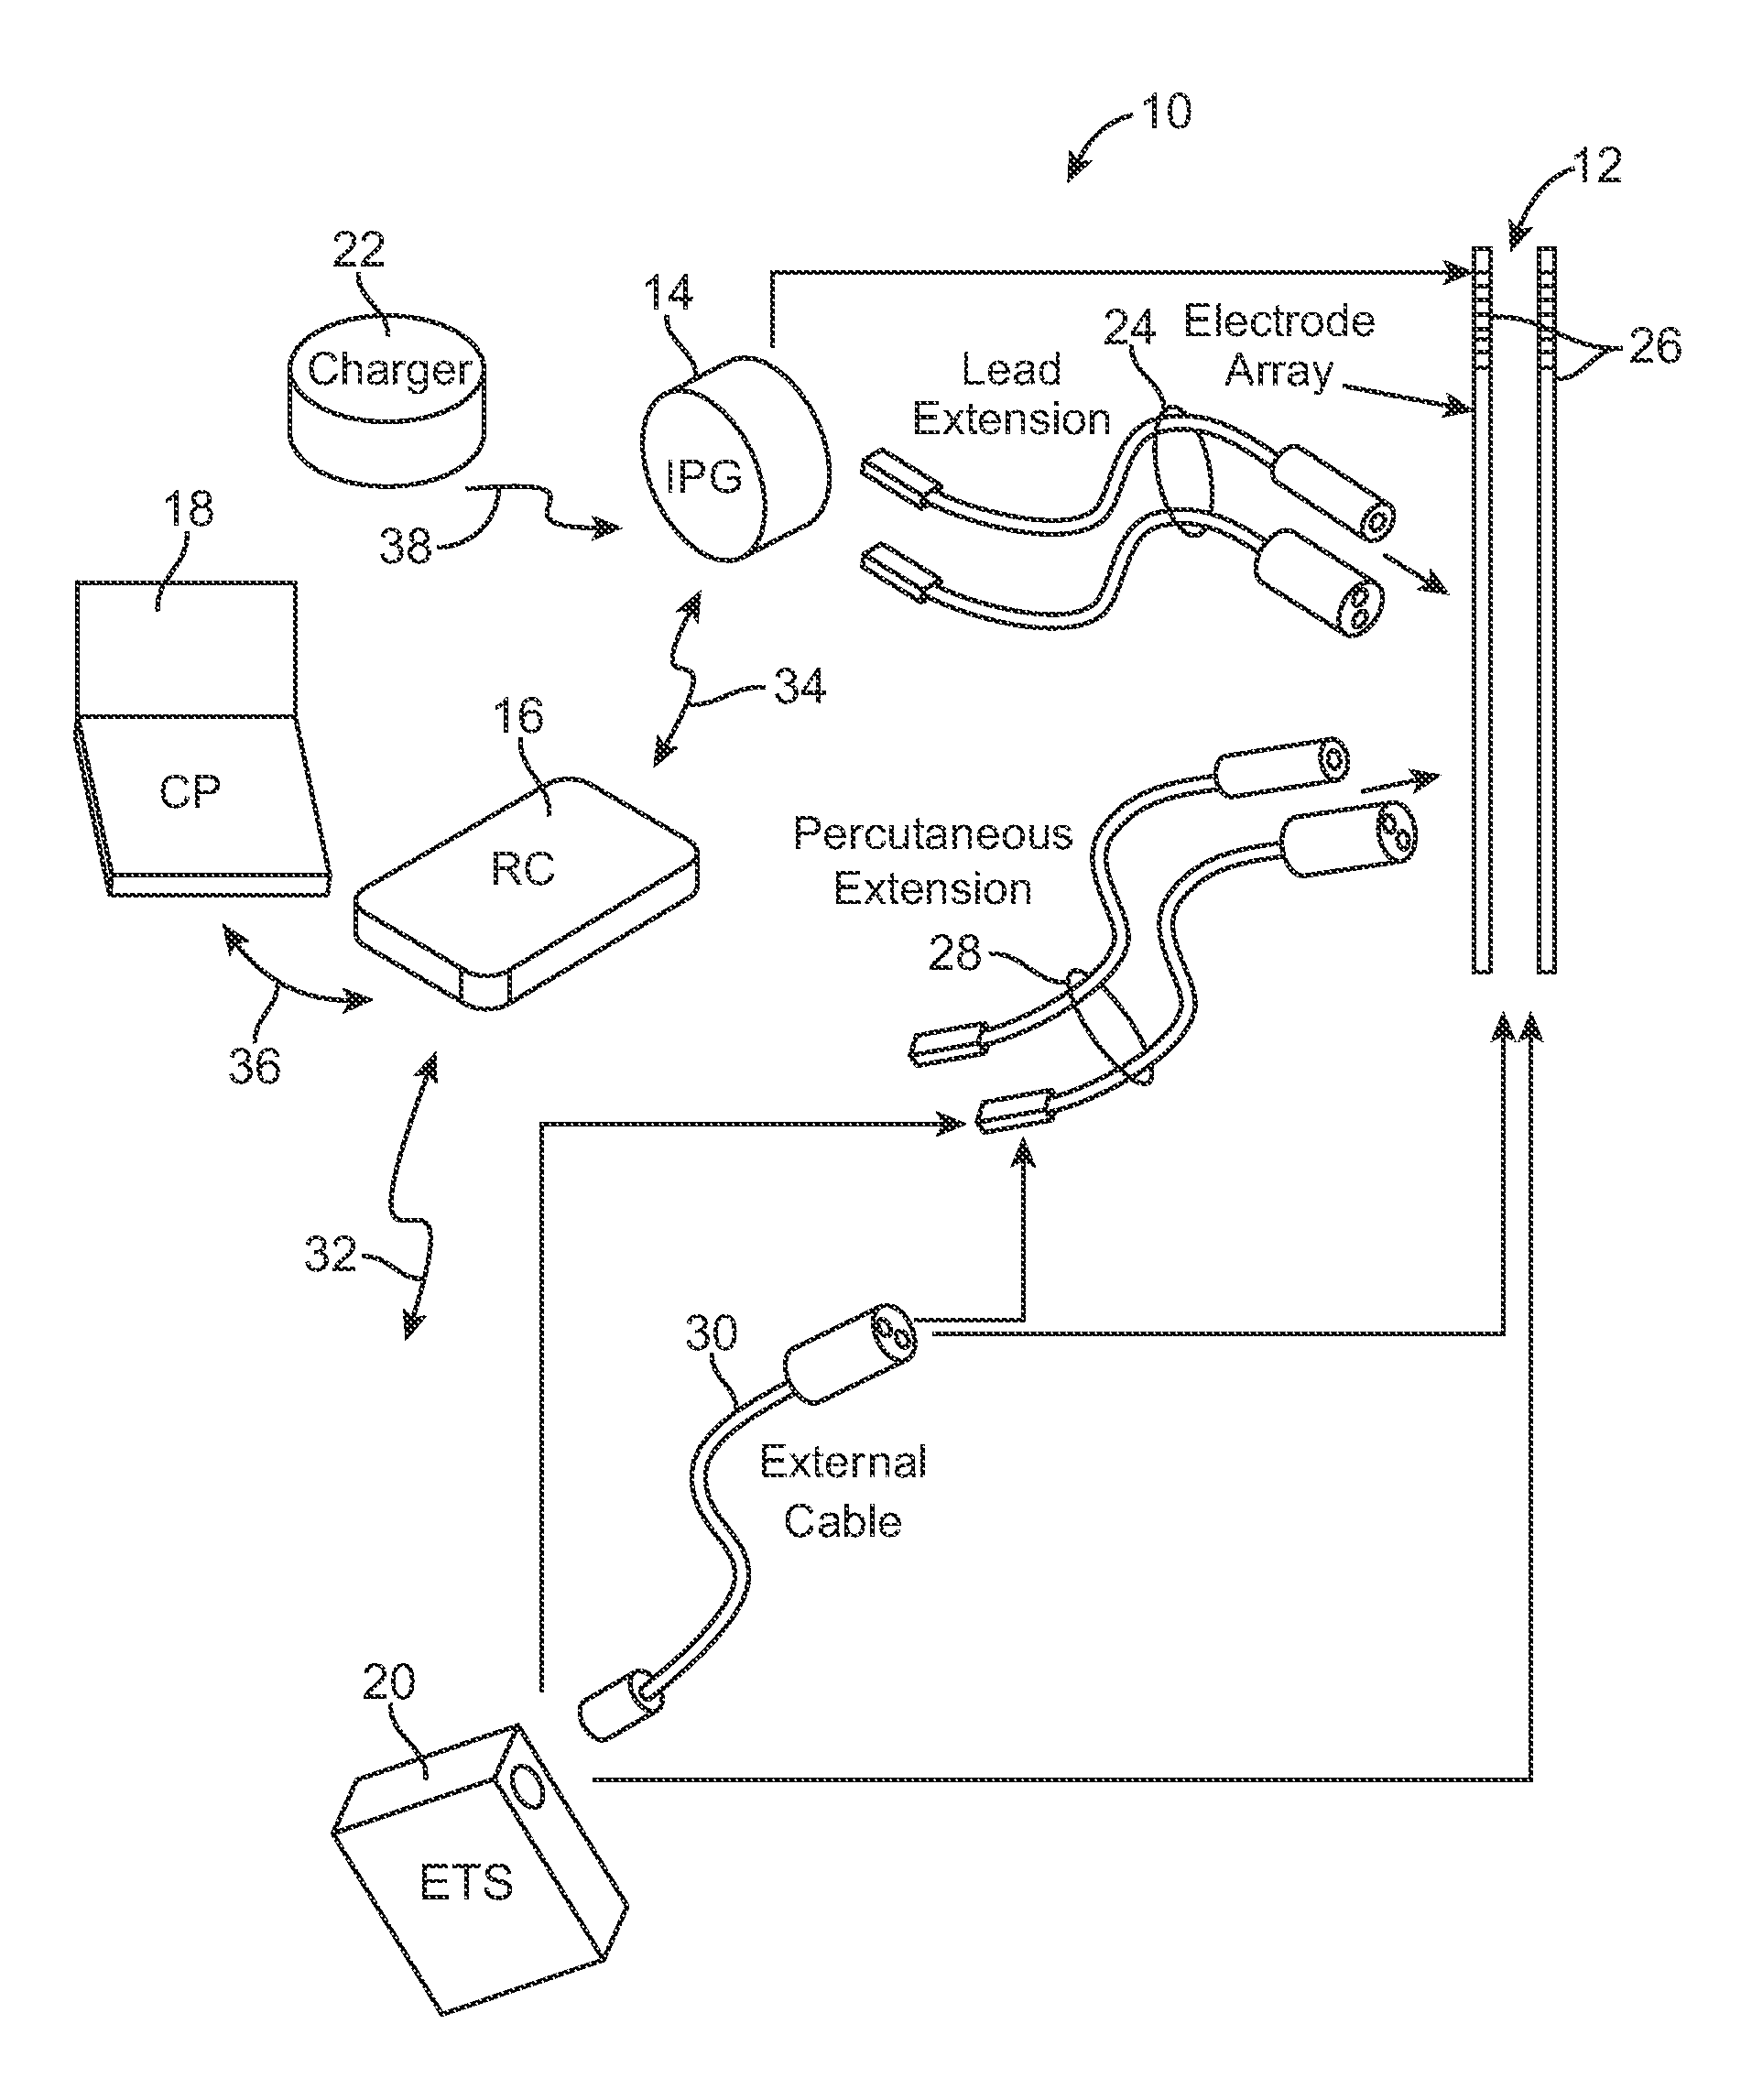 System and method for determining appropriate steering tables for distributing stimulation energy among multiple neurostimulation electrodes